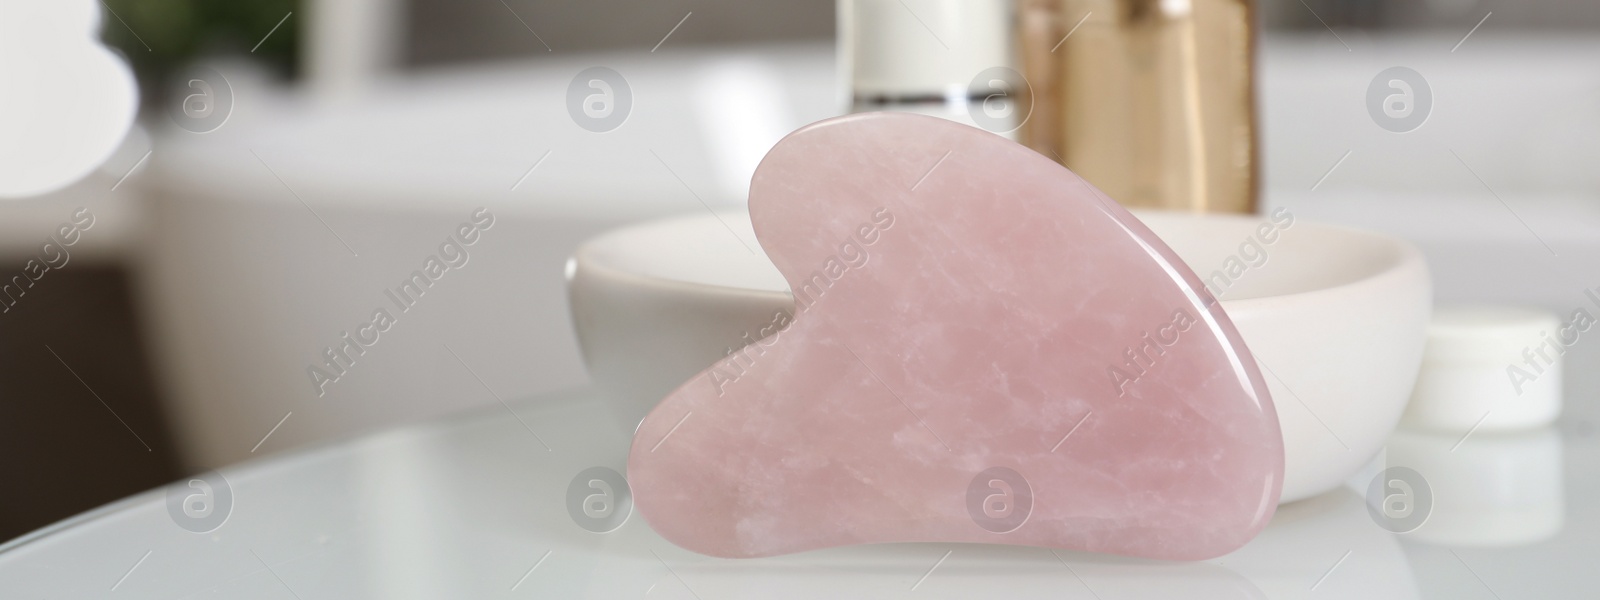 Image of Rose quartz gua sha tool and cosmetic products on white table in bathroom, closeup. Banner design